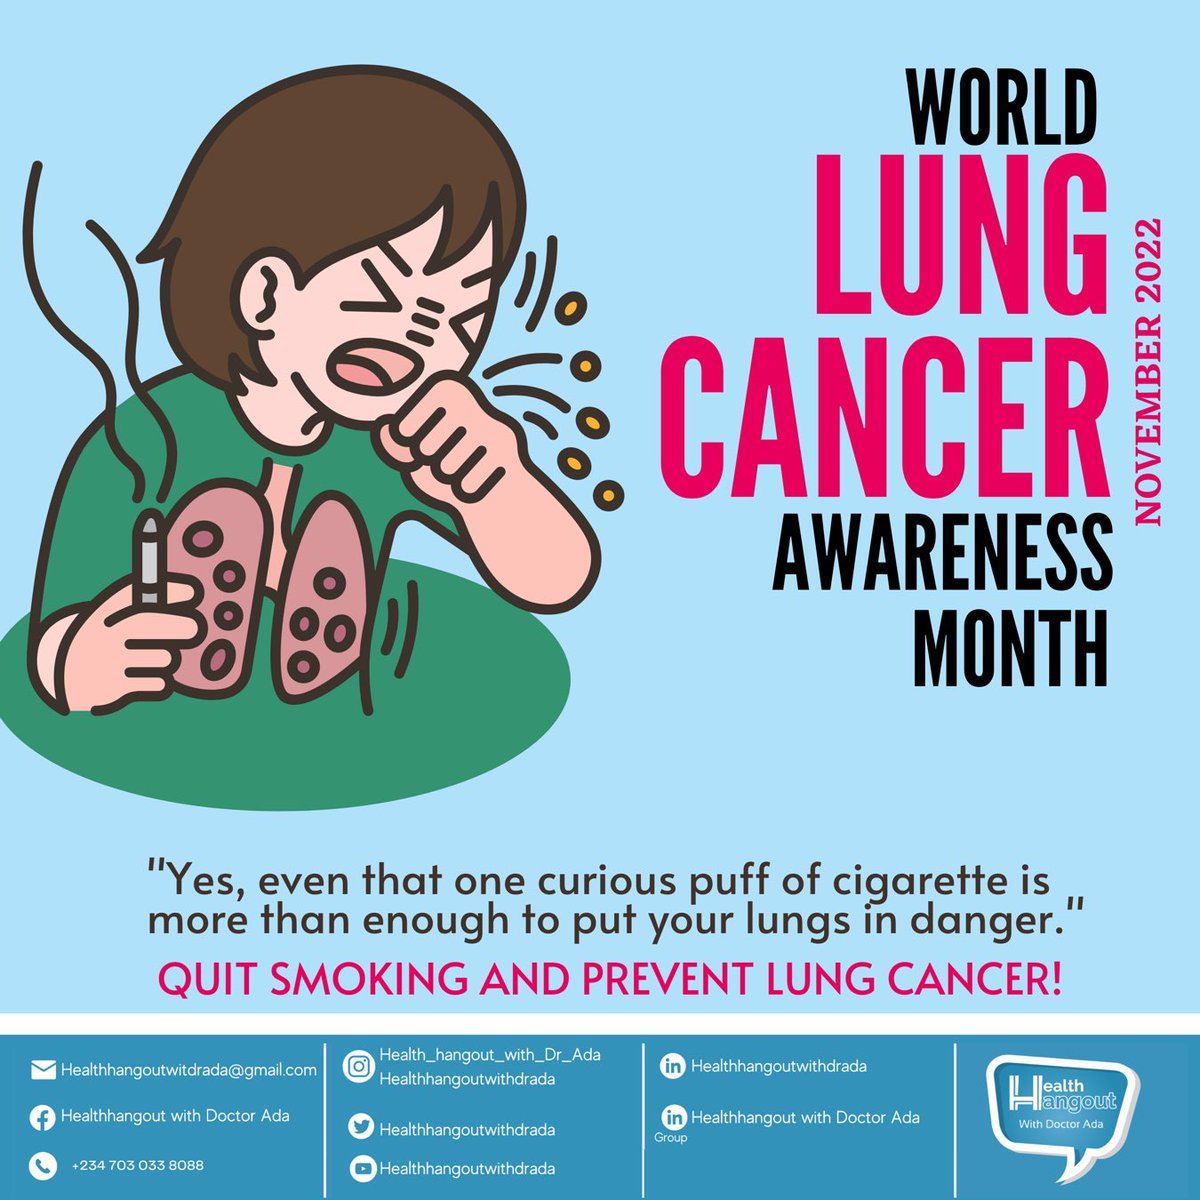 One set of lungs🫁

Yes, even that one curious puff of cigarette could put your lungs in danger.

Quit smoking and prevent lung cancer!

#worldlungcancerawarenessmonth #lungcancer #cancerprevention #lungcancerawarenessmonth #lunghealth #lungcancerawareness